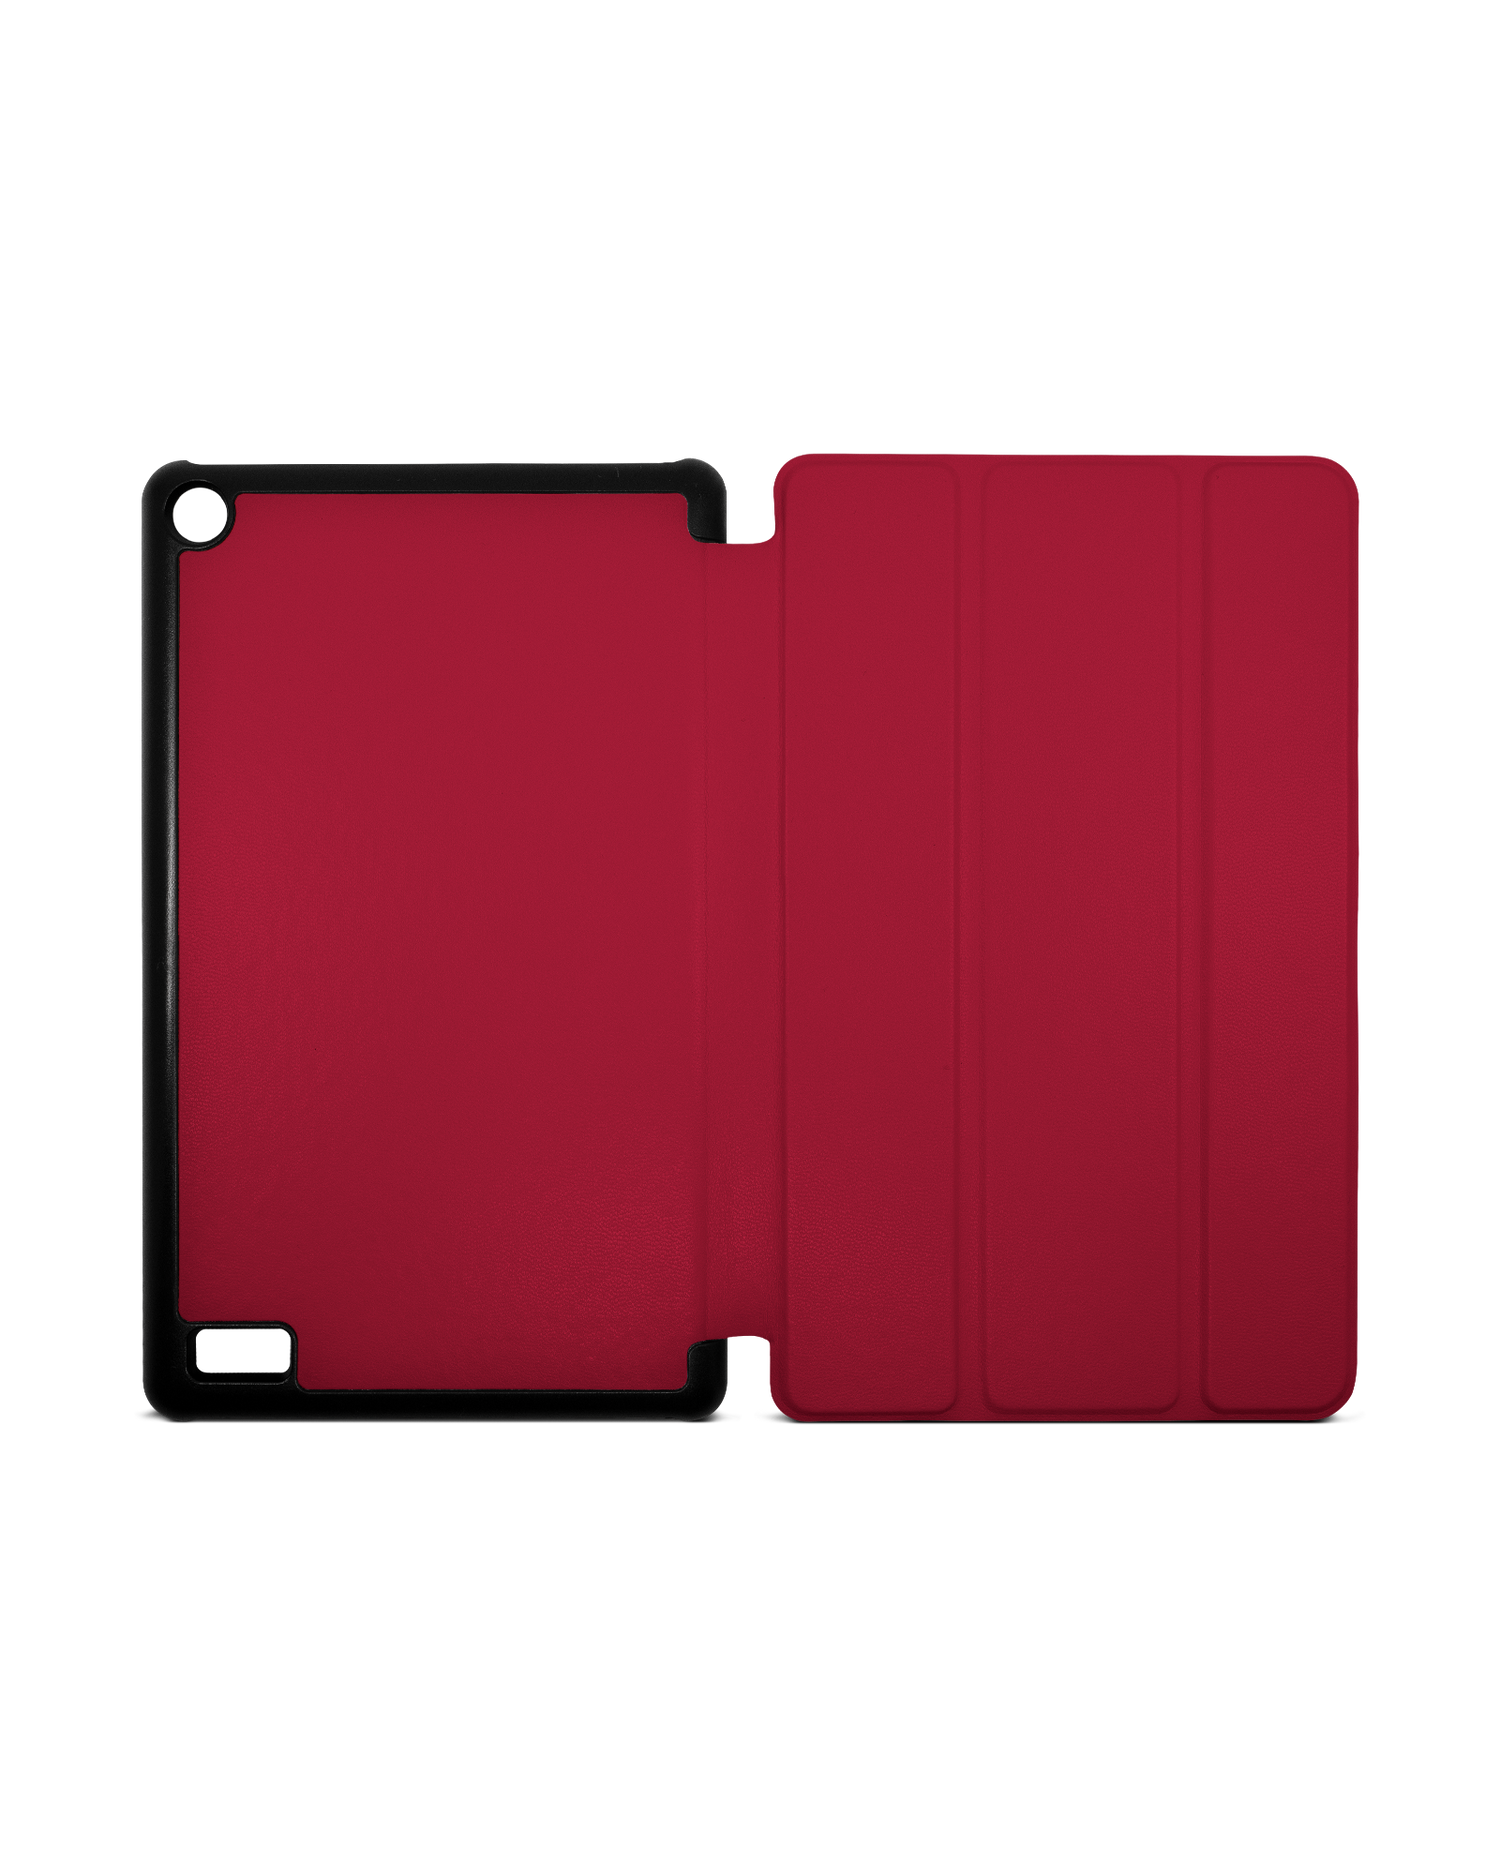 RED Tablet Smart Case for Amazon Fire 7: Opened